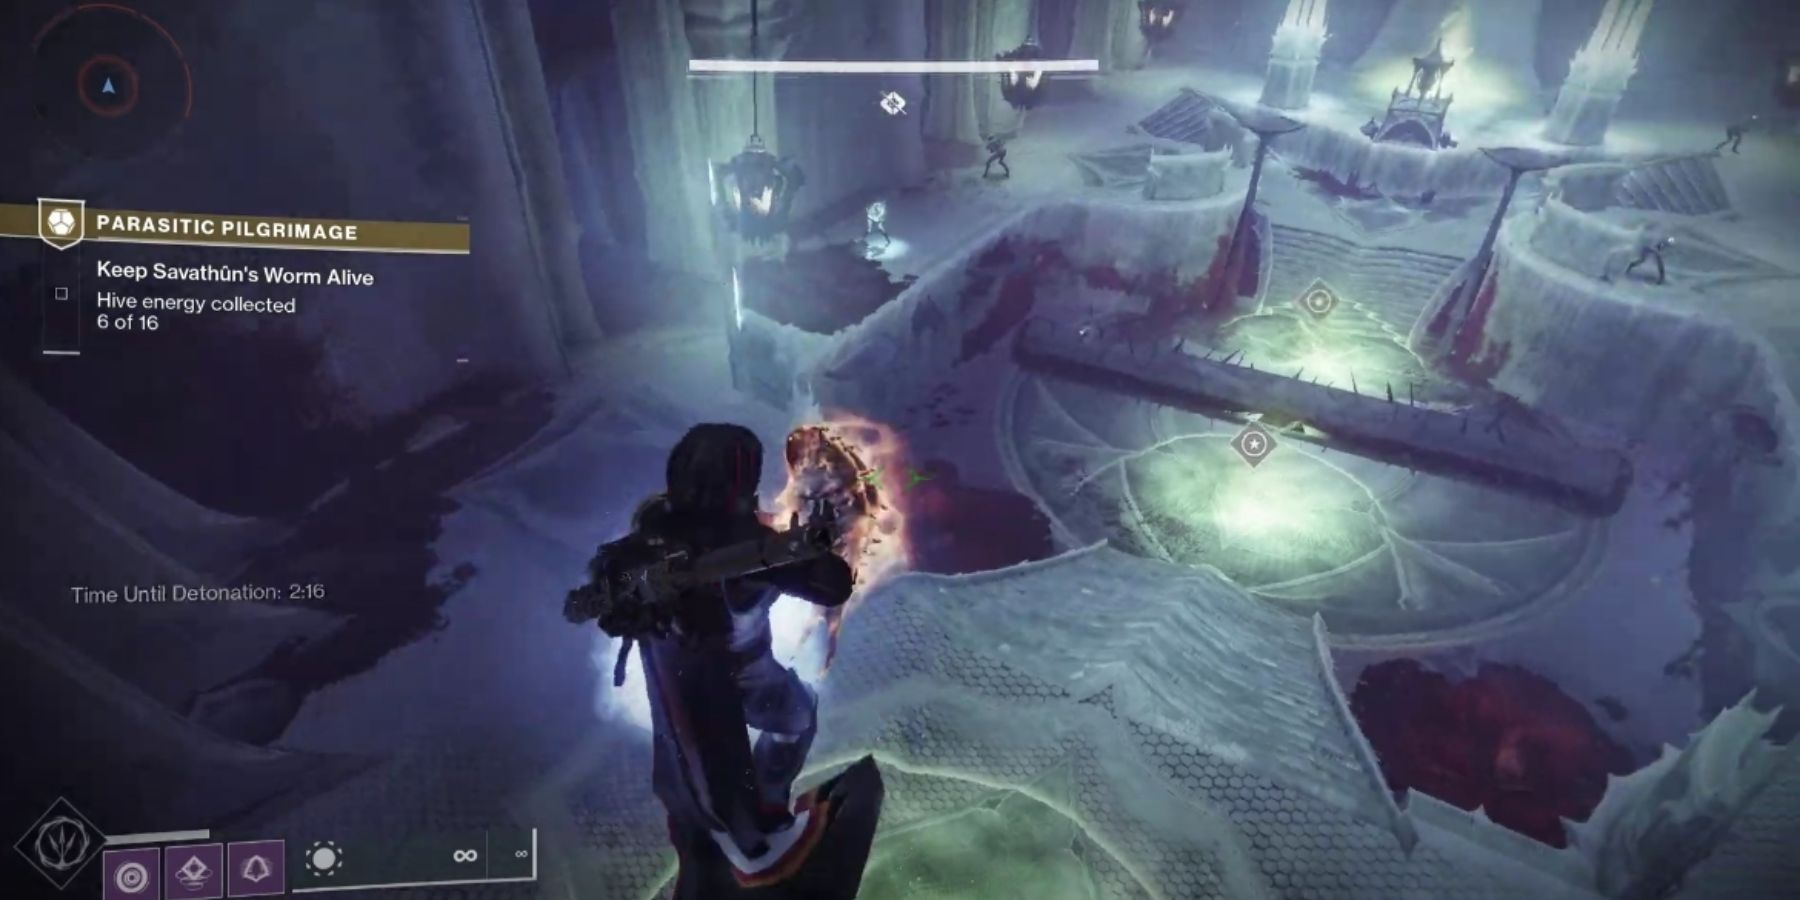 Destiny 2 Player Holding Worm In Parasitic Pilgrimage